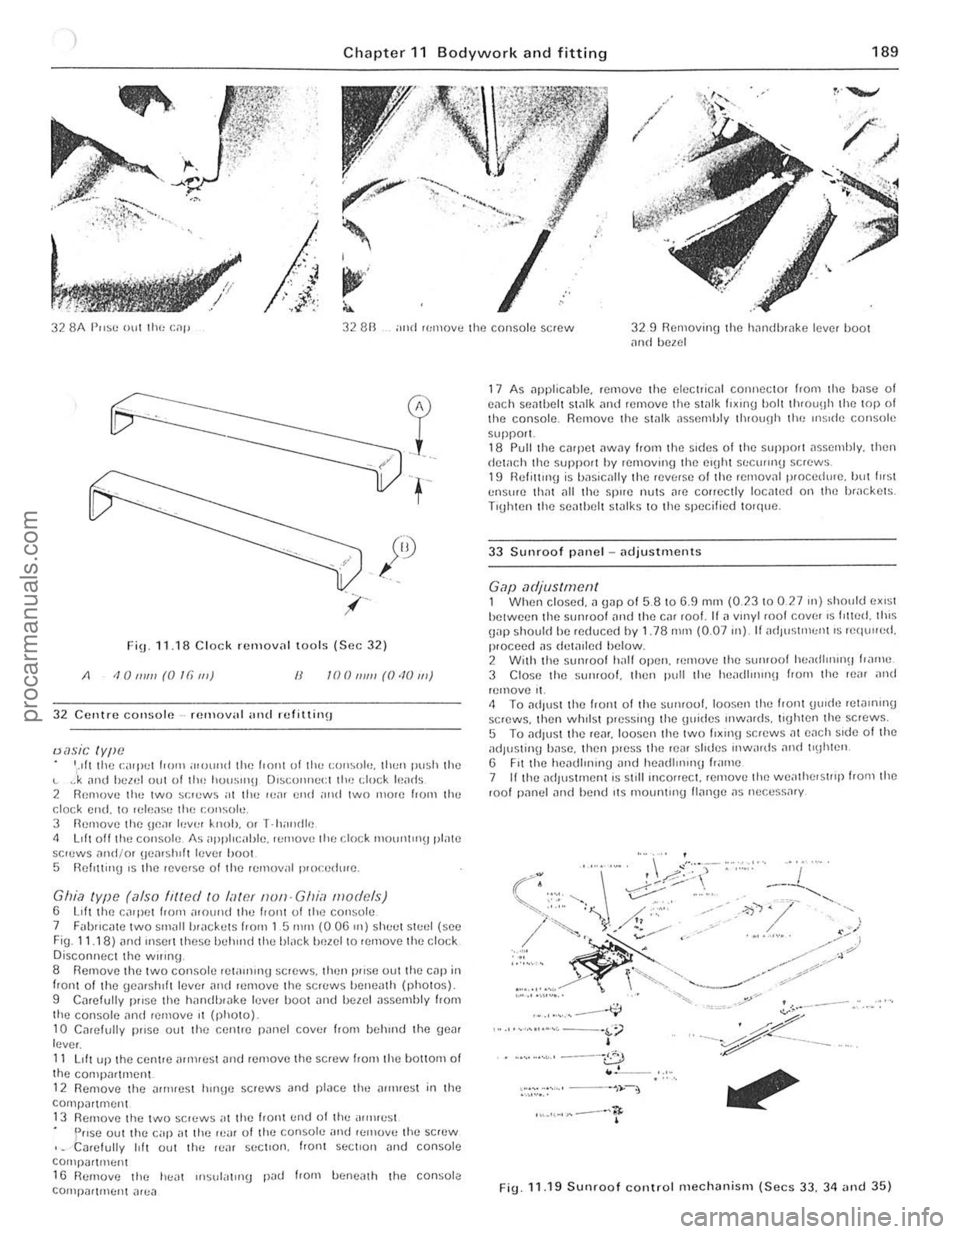 FORD CAPRI 1974  Workshop Manual -
) Chapter 11 Bodywork and fitting 189 
/~ 
32 8A I',,~c 0111 Ihe alp 32 an ali(I ,(,mo  .. c the console screw 329 Removing the hnndbrake lever boot find be~el 
Fig.n.la C lock ro:.,,"ov<ll tool